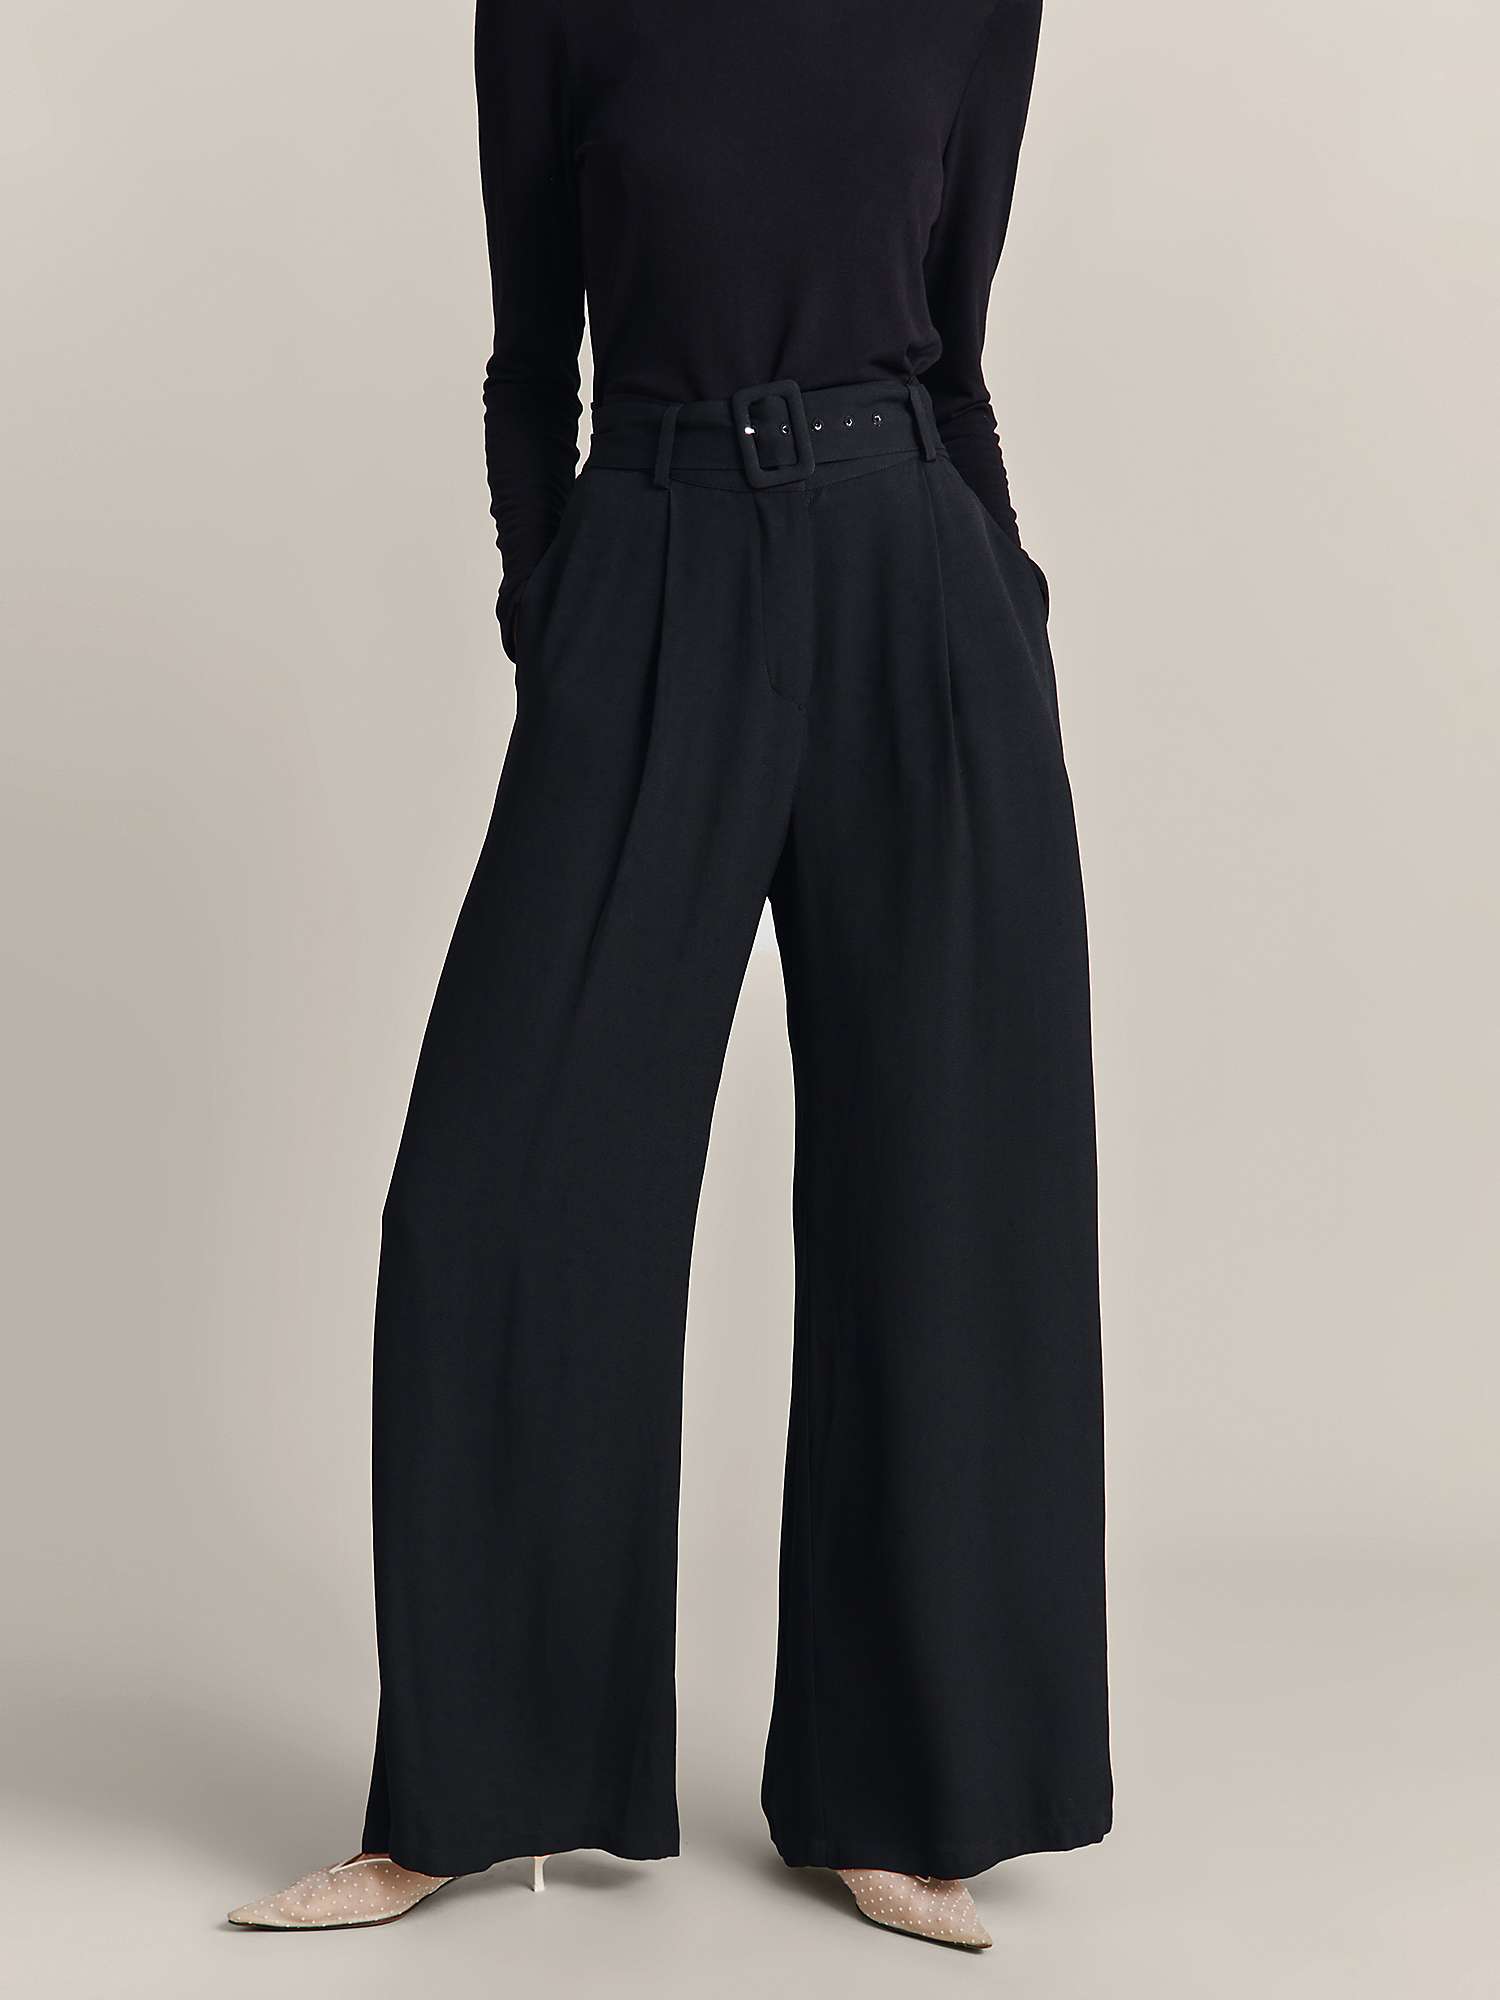 Buy Ghost Clara Satin Palazzo Trousers Online at johnlewis.com